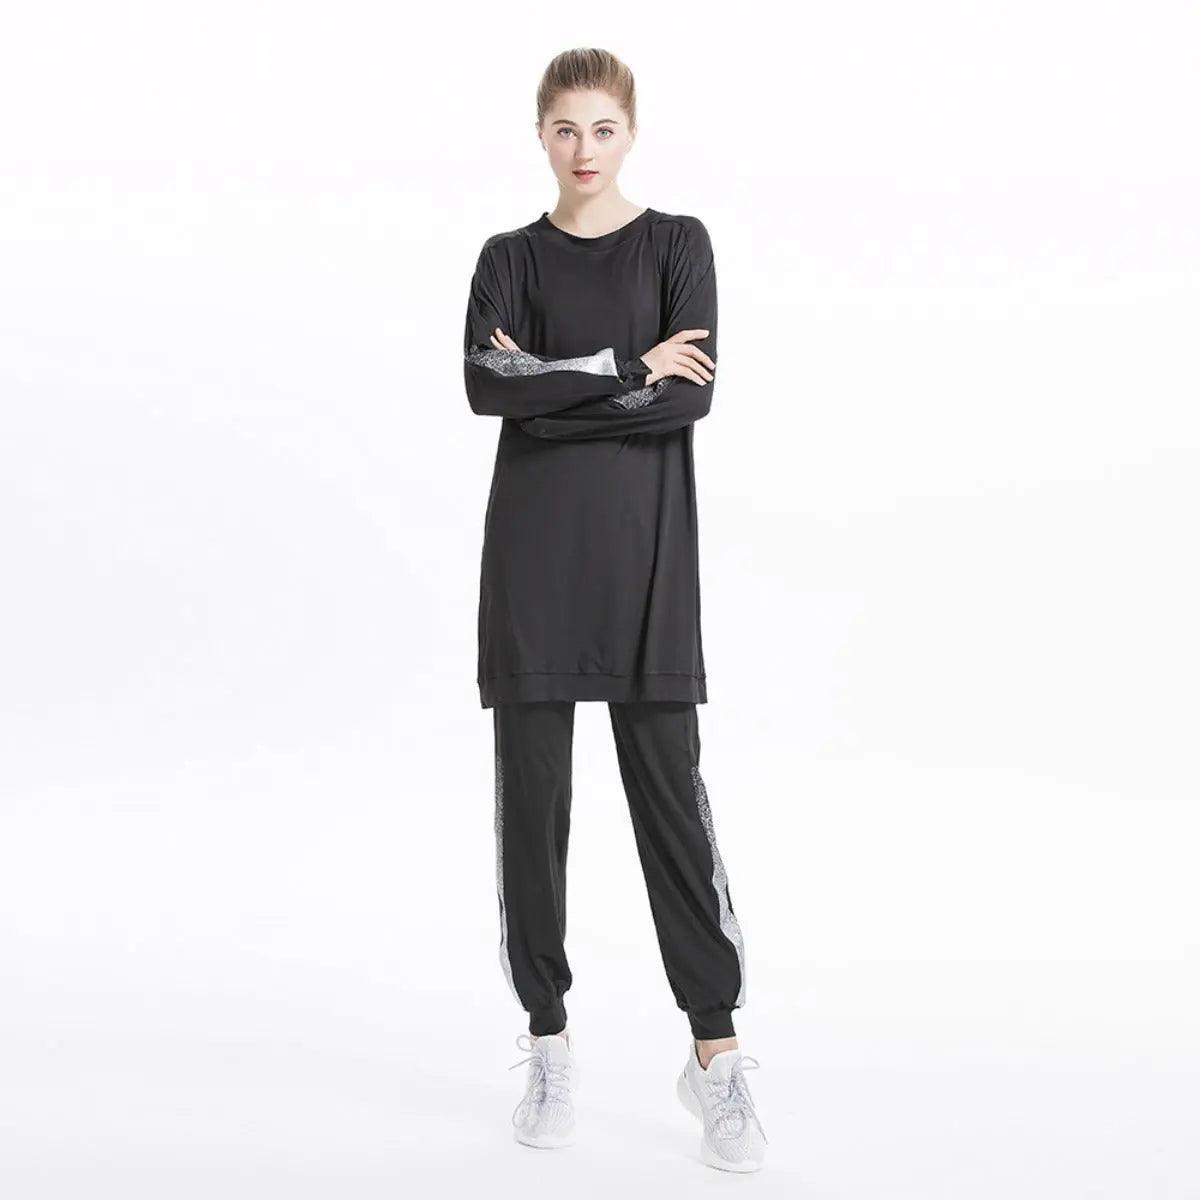 Women's Casual Two Piece Sweatsuit Set - Long Sleeve Crewneck and Joggers MB008 - Mariam's Collection